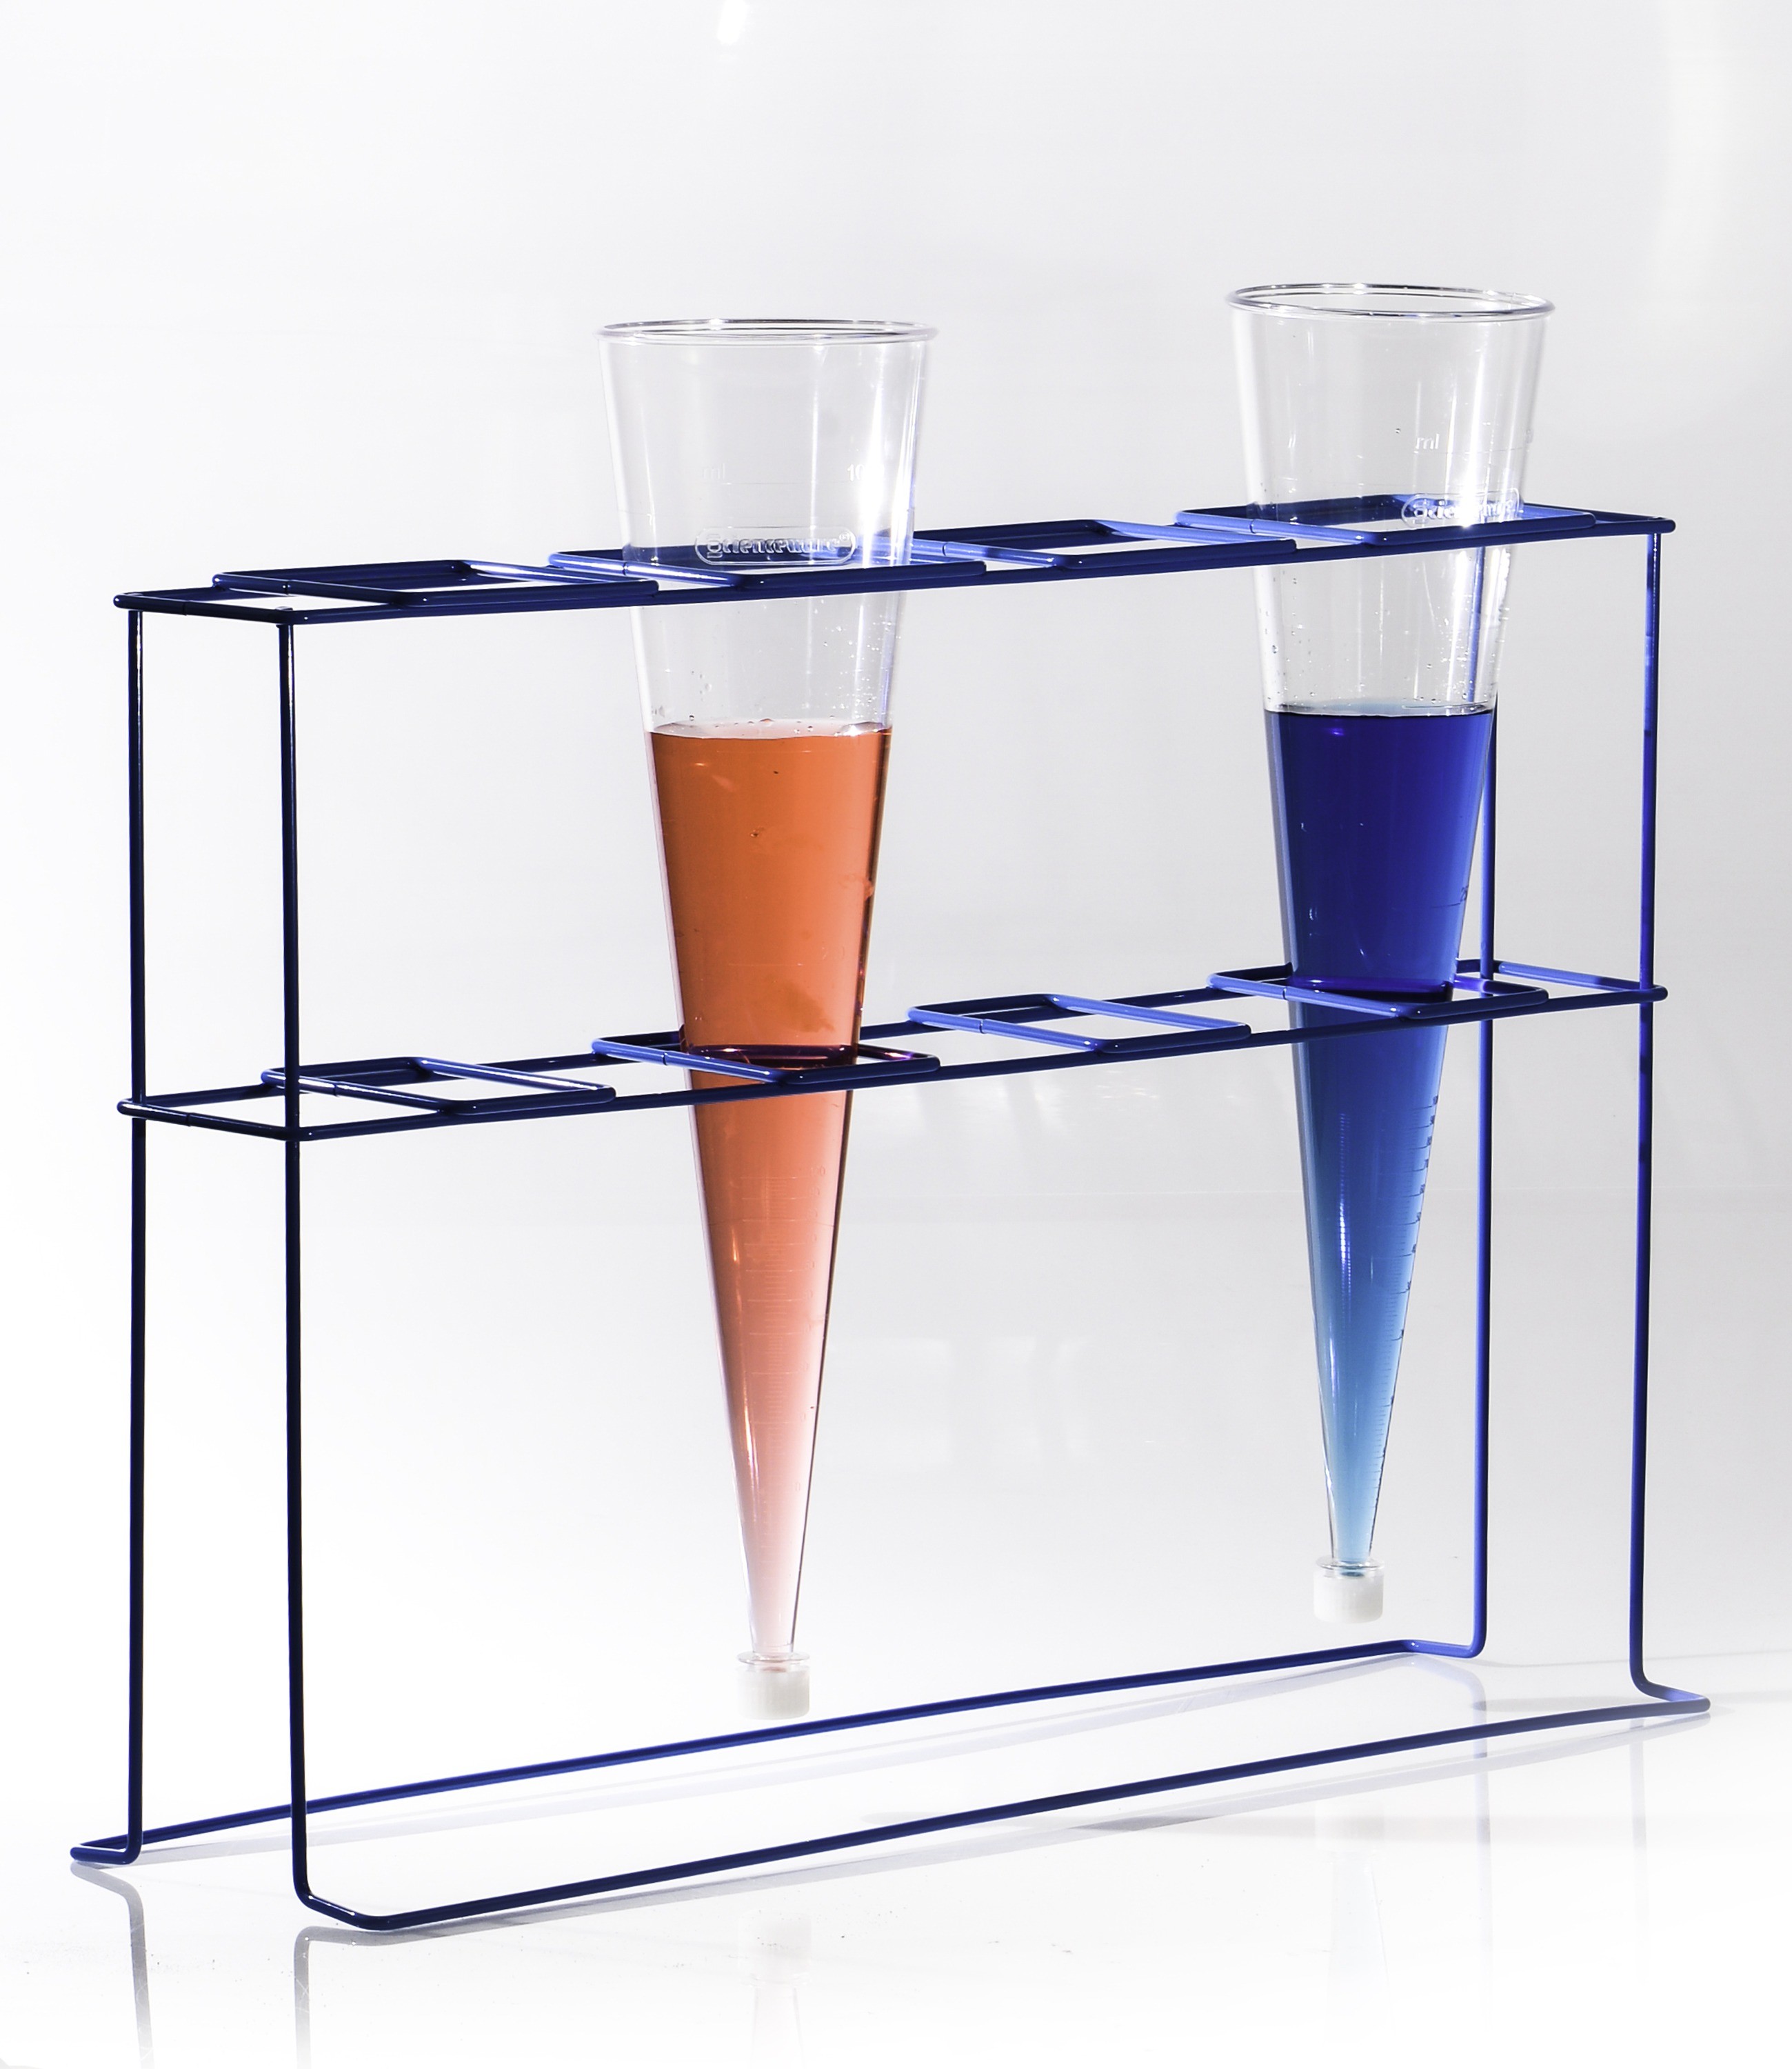 SP Bel-Art Poxygrid Imhoff Cone Rack; 4 Places, 22³⁄₄ x 6³⁄₄ x 16 in.